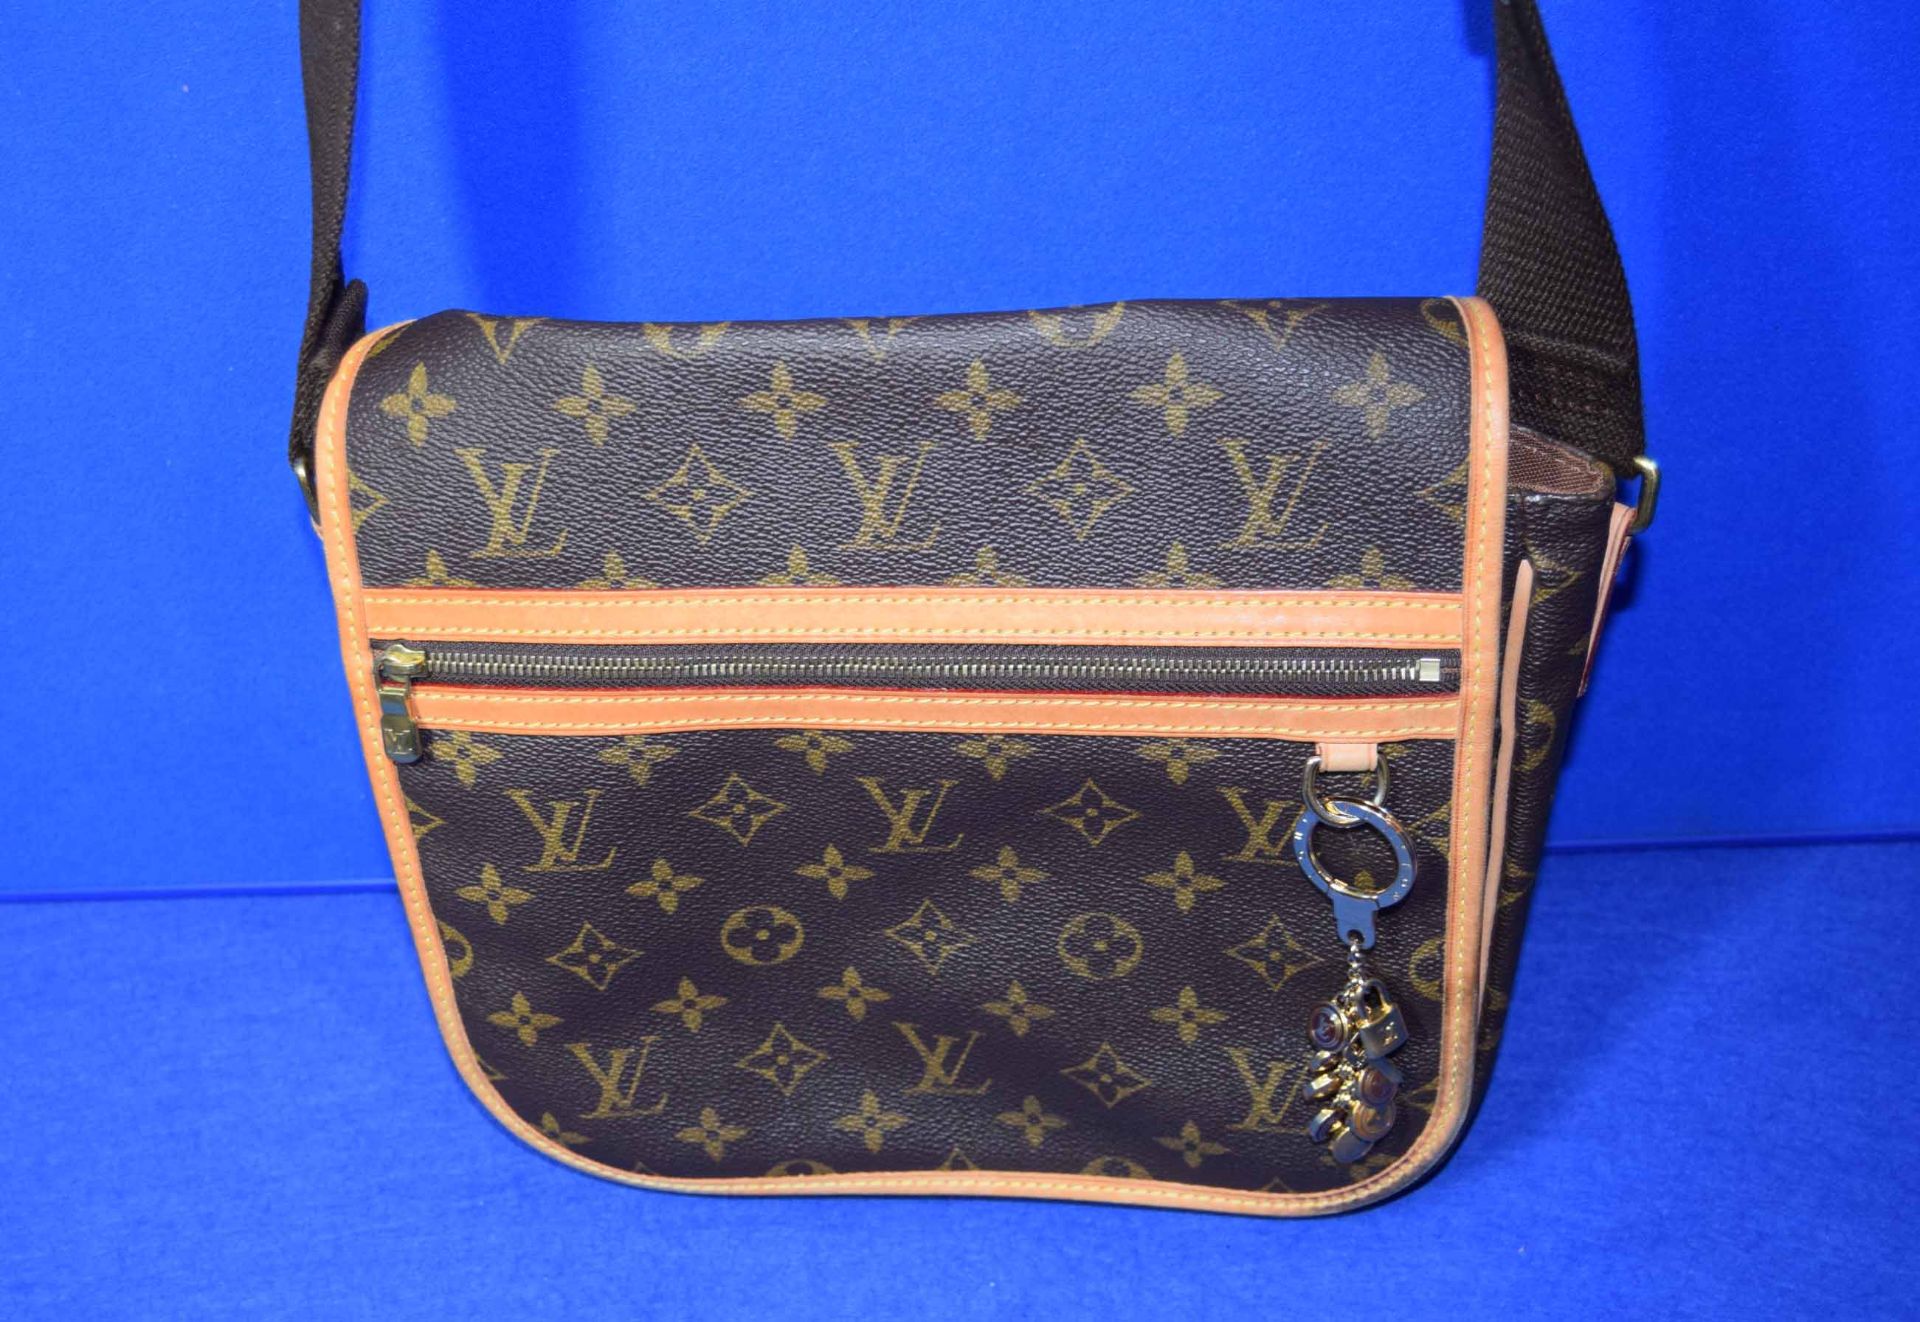 A LOUIS VUITTON Messenger Bosphore Cross Body Shoulder Bag in Chocolate Brown/Camel Leather with - Image 4 of 7